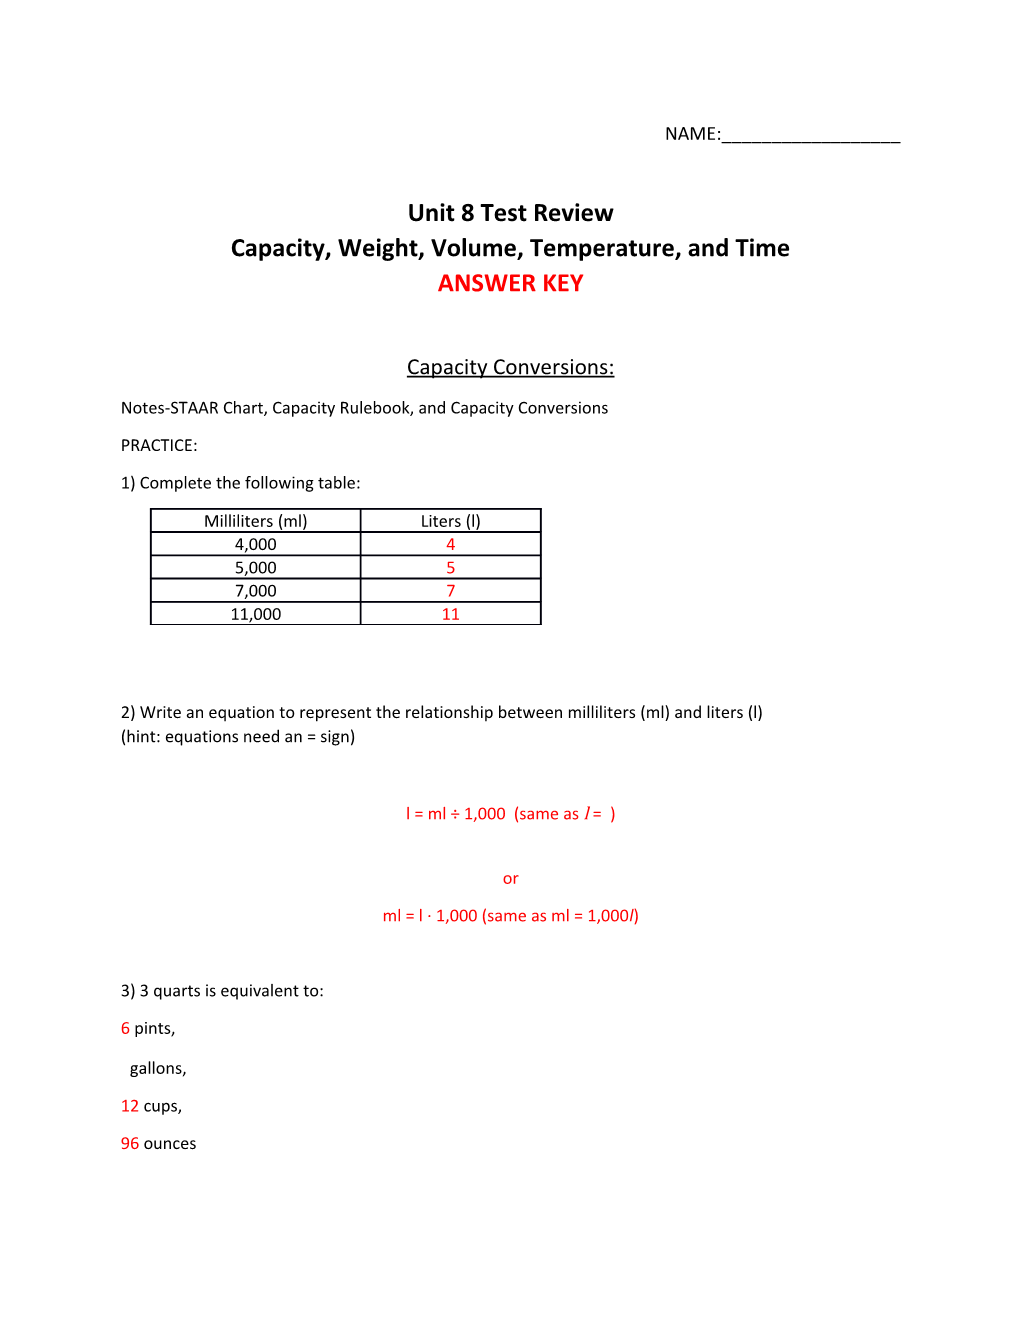 Notes-STAAR Chart, Capacity Rulebook, and Capacity Conversions